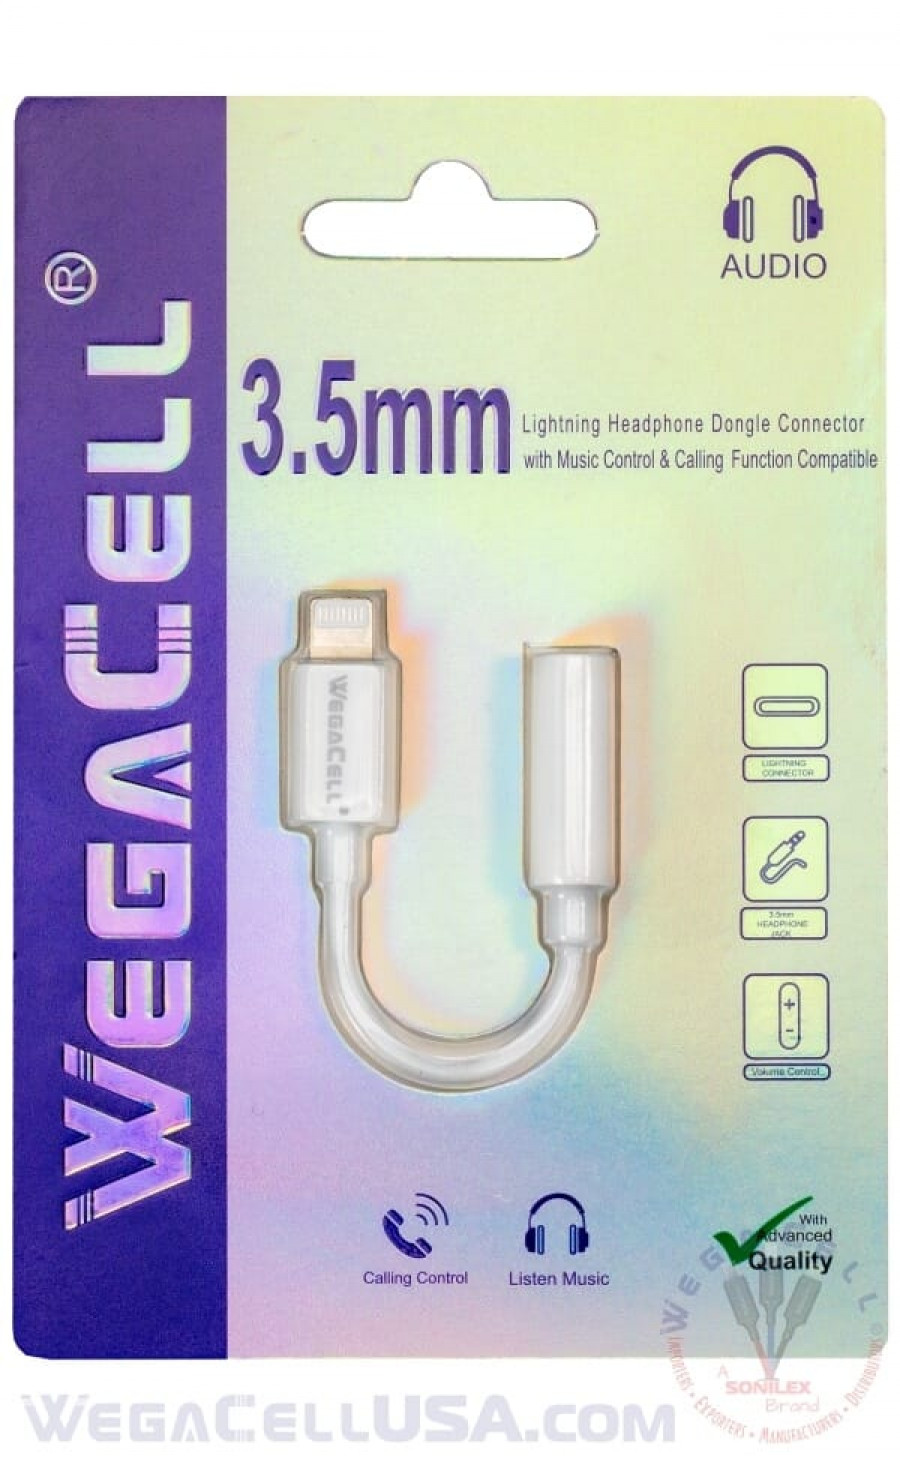 apple iphone lightning to 3.5 mm aux adapter - wholesale pkg. wegacell: wl-44iph-cn cellphone adapter 12